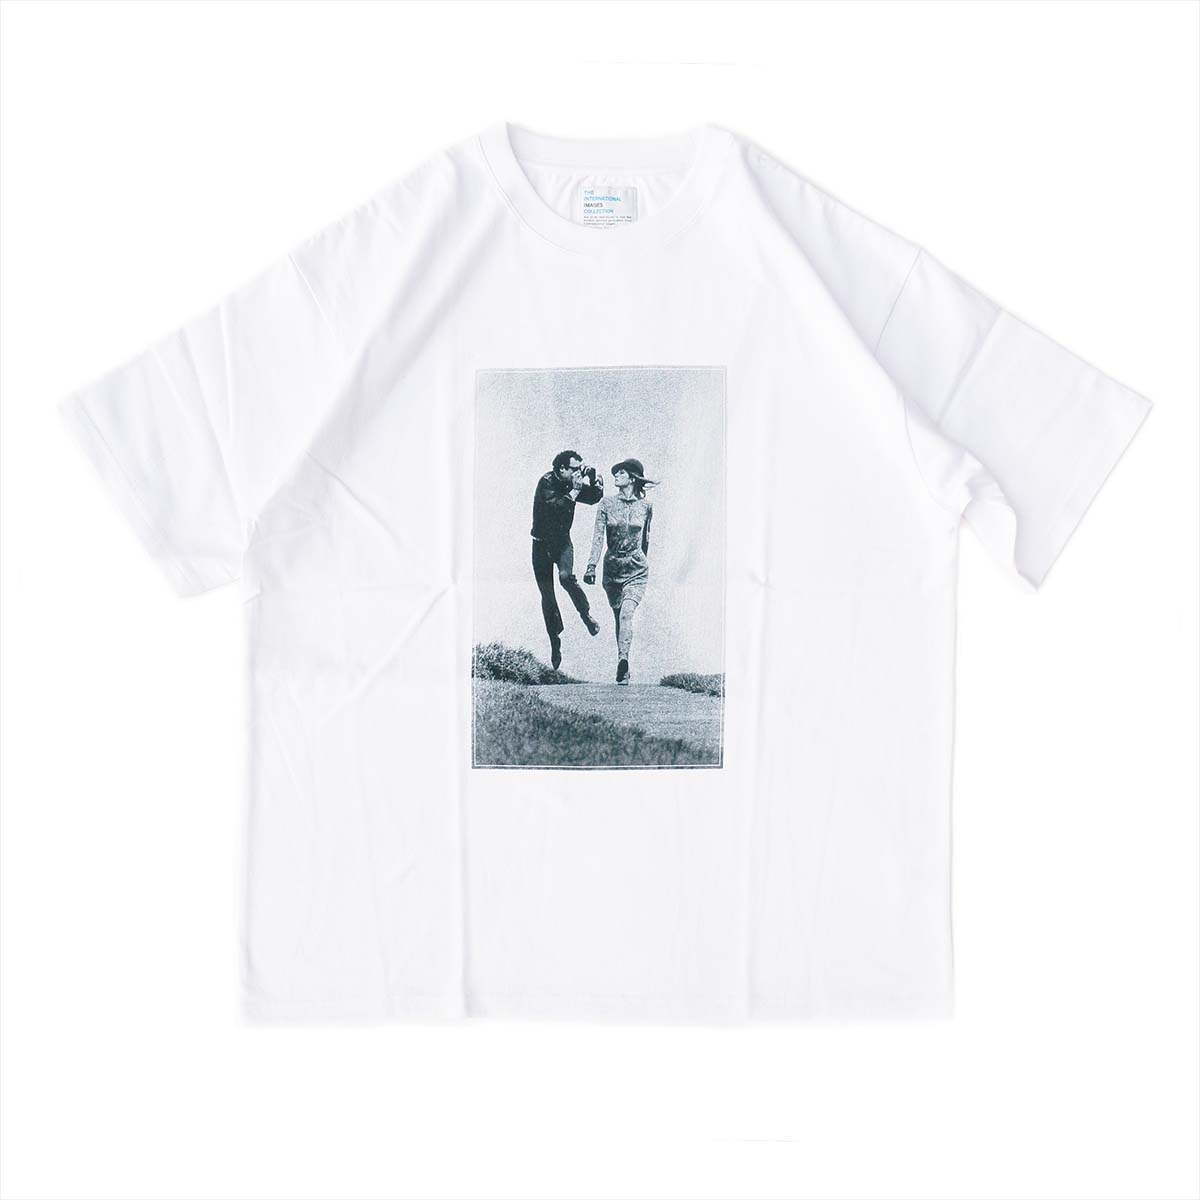 INTERNATIONAL IMAGES COLLECTION / GRAPHIC T-SHIRT (PHOTOGRAPHER) IIC222-03